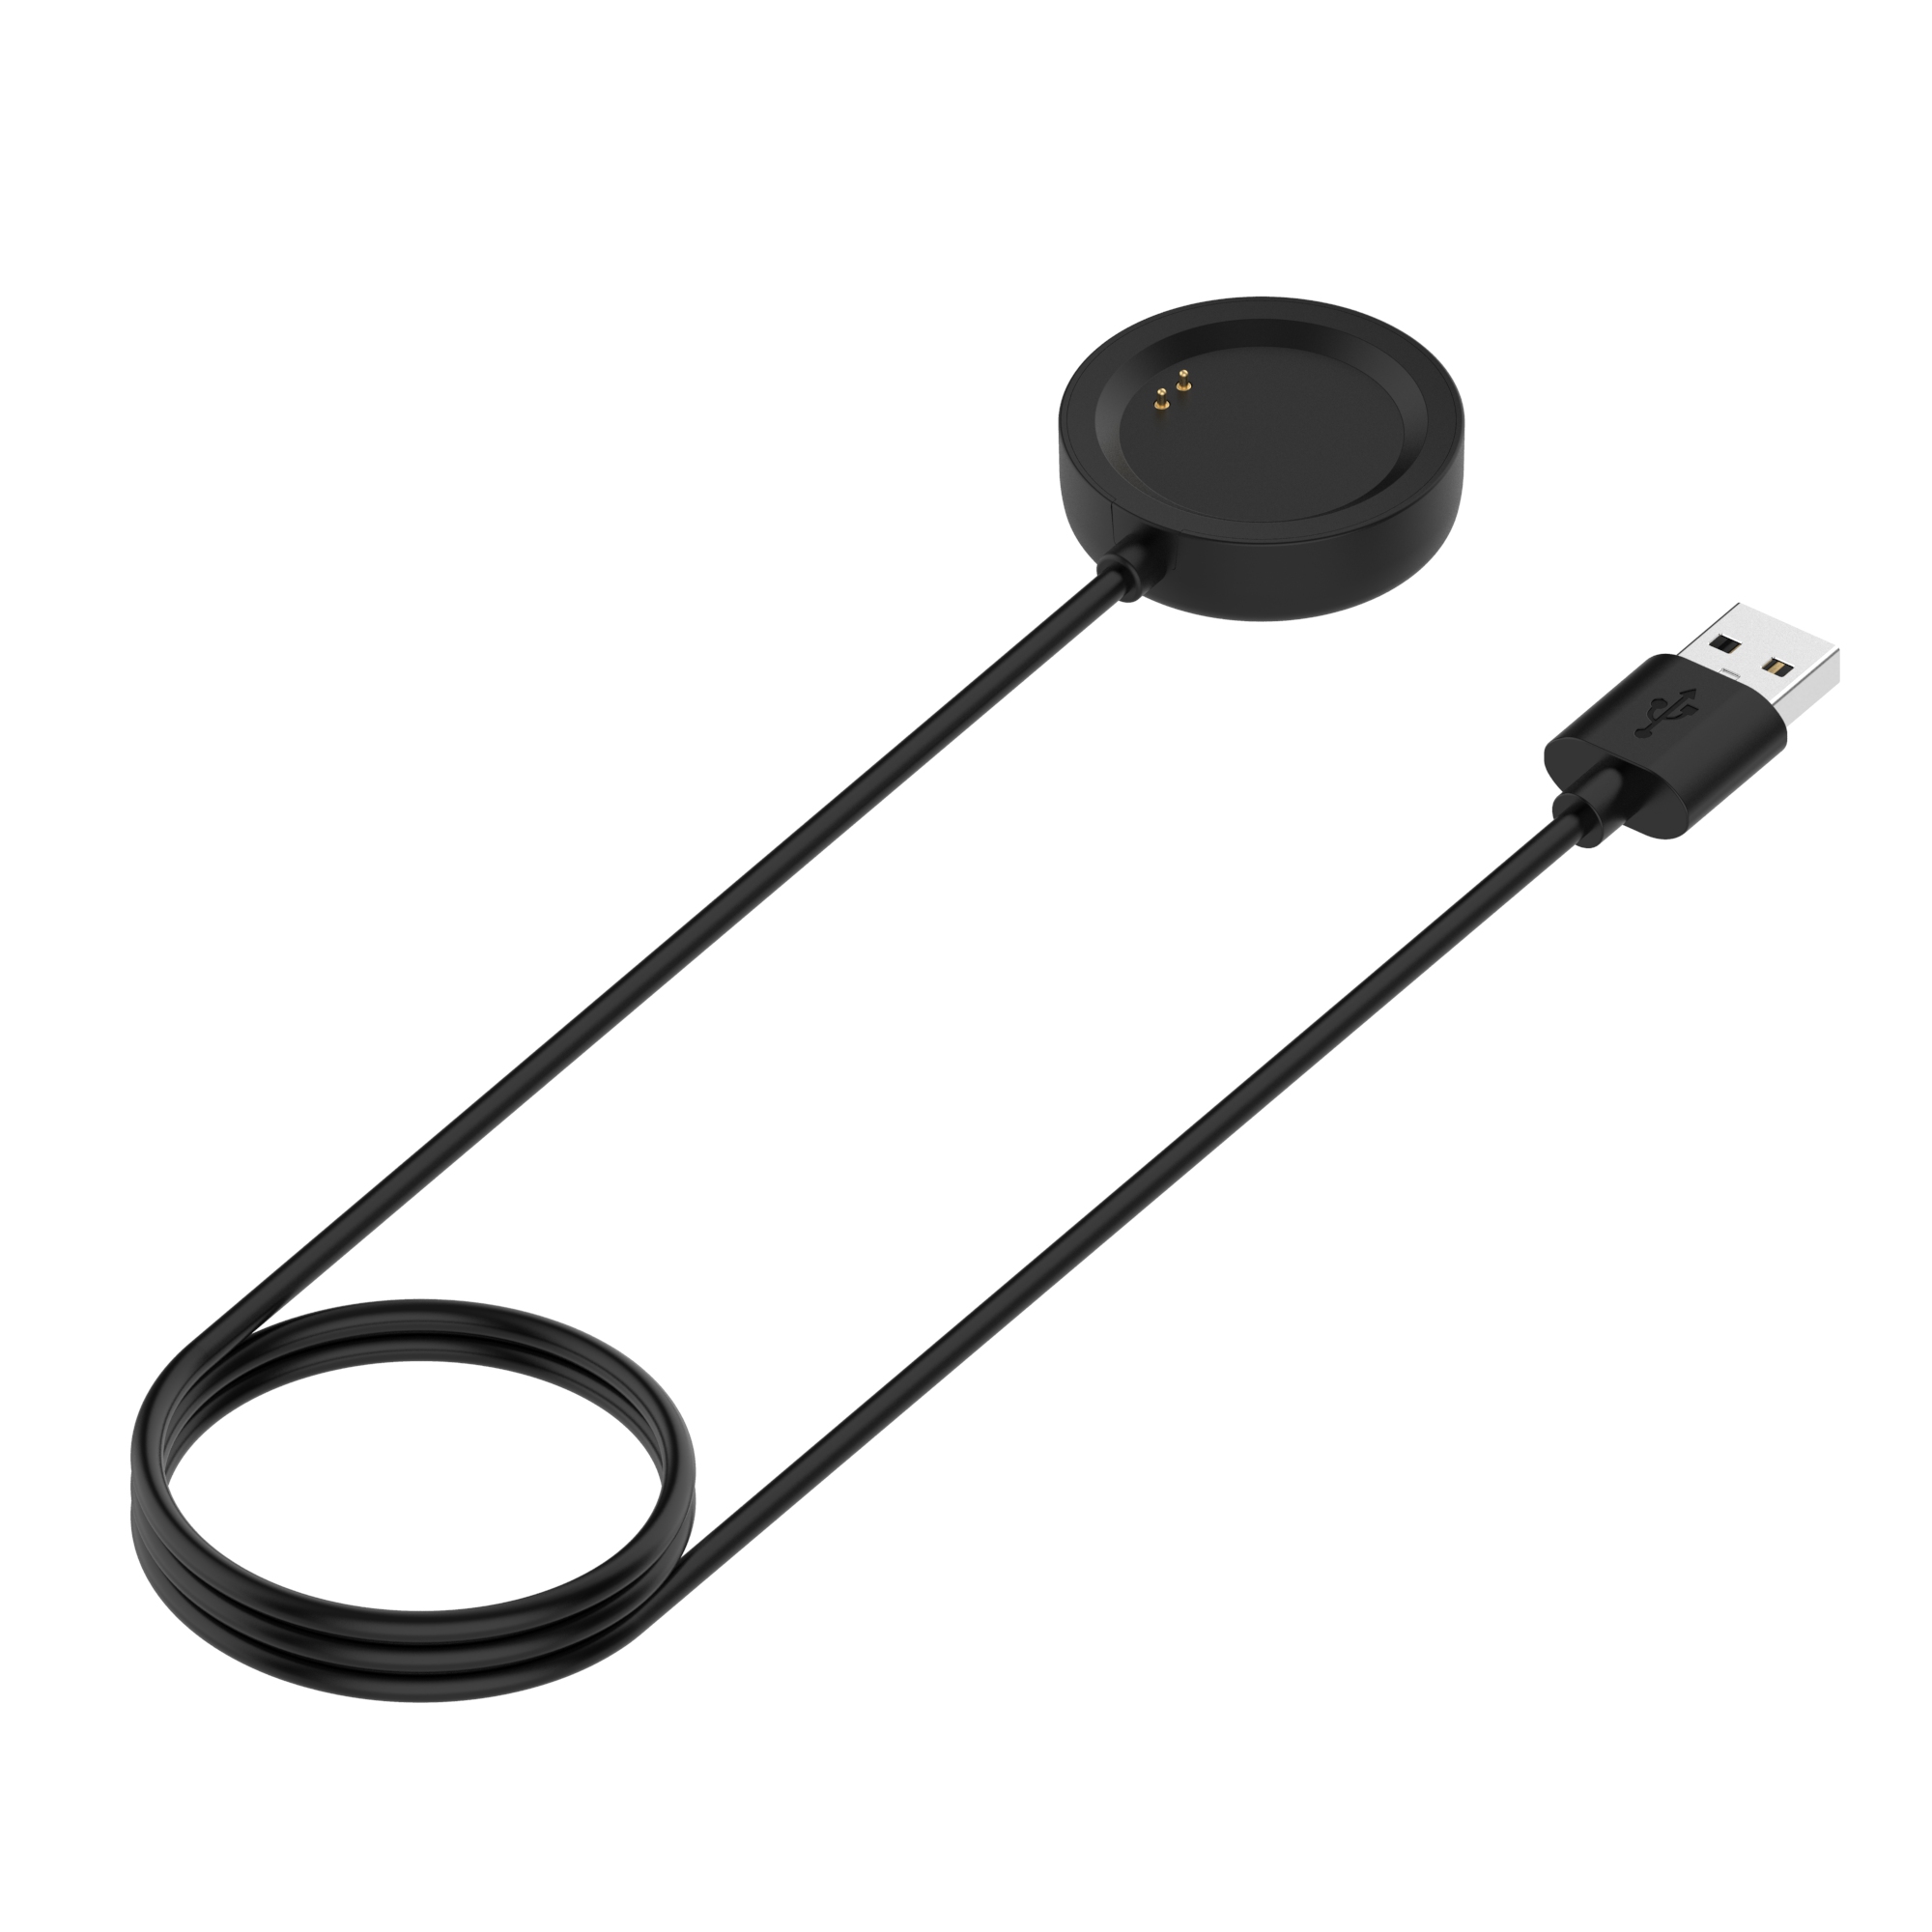 Bakeey-1m-Watch-Cable-Charging-Cable-for-Oneplus-Watch-1862266-3